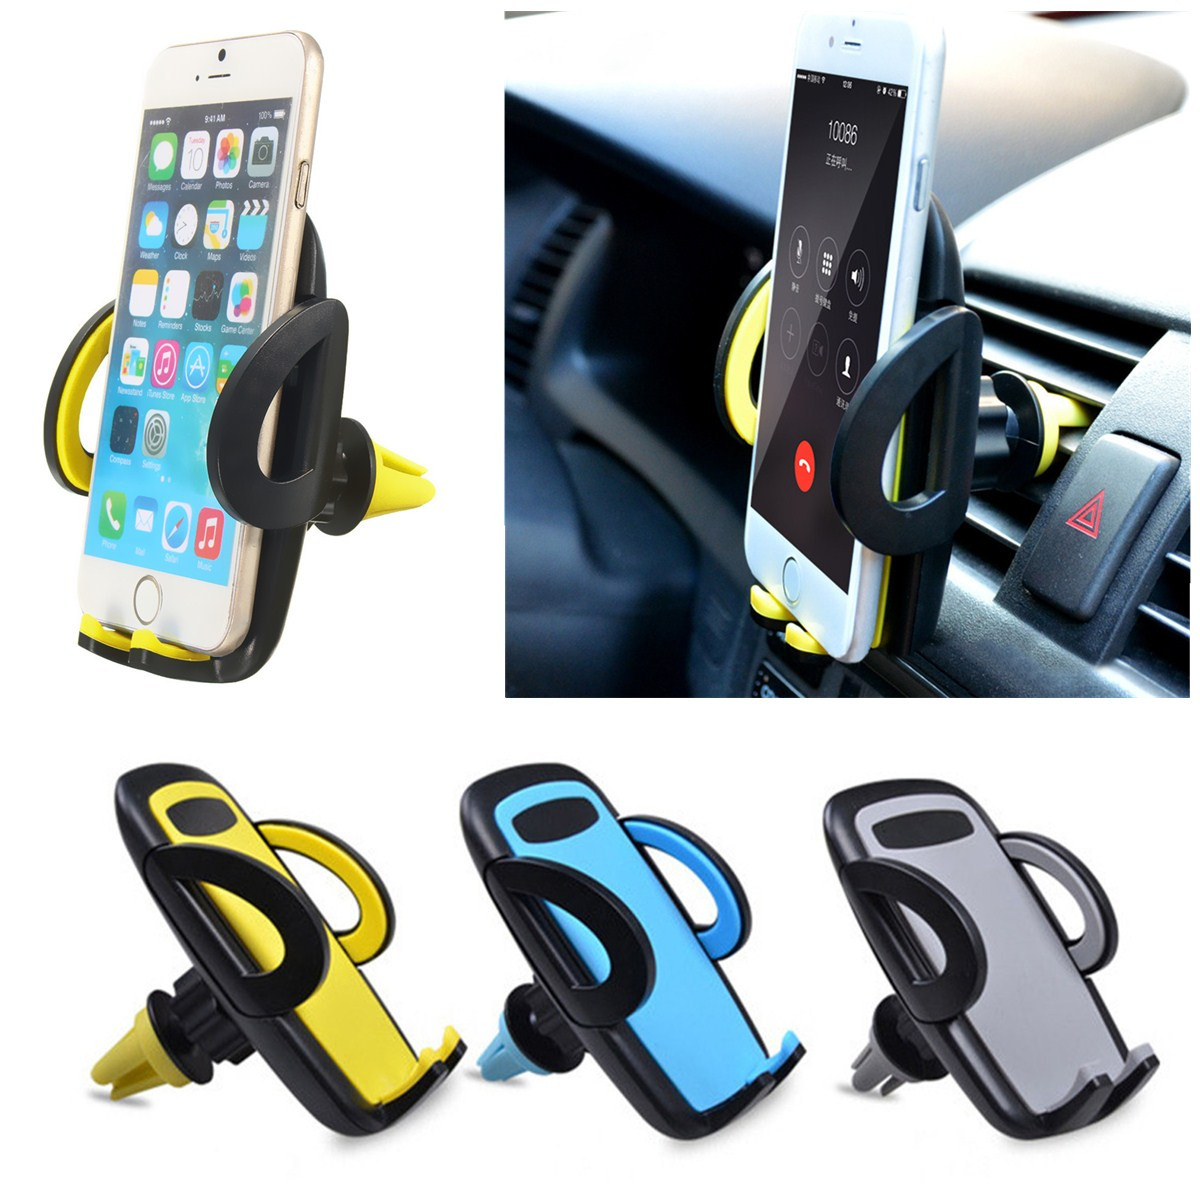 

Universal 360° Rotation Car Air Vent Holder Stand Mount For Mobile Phone